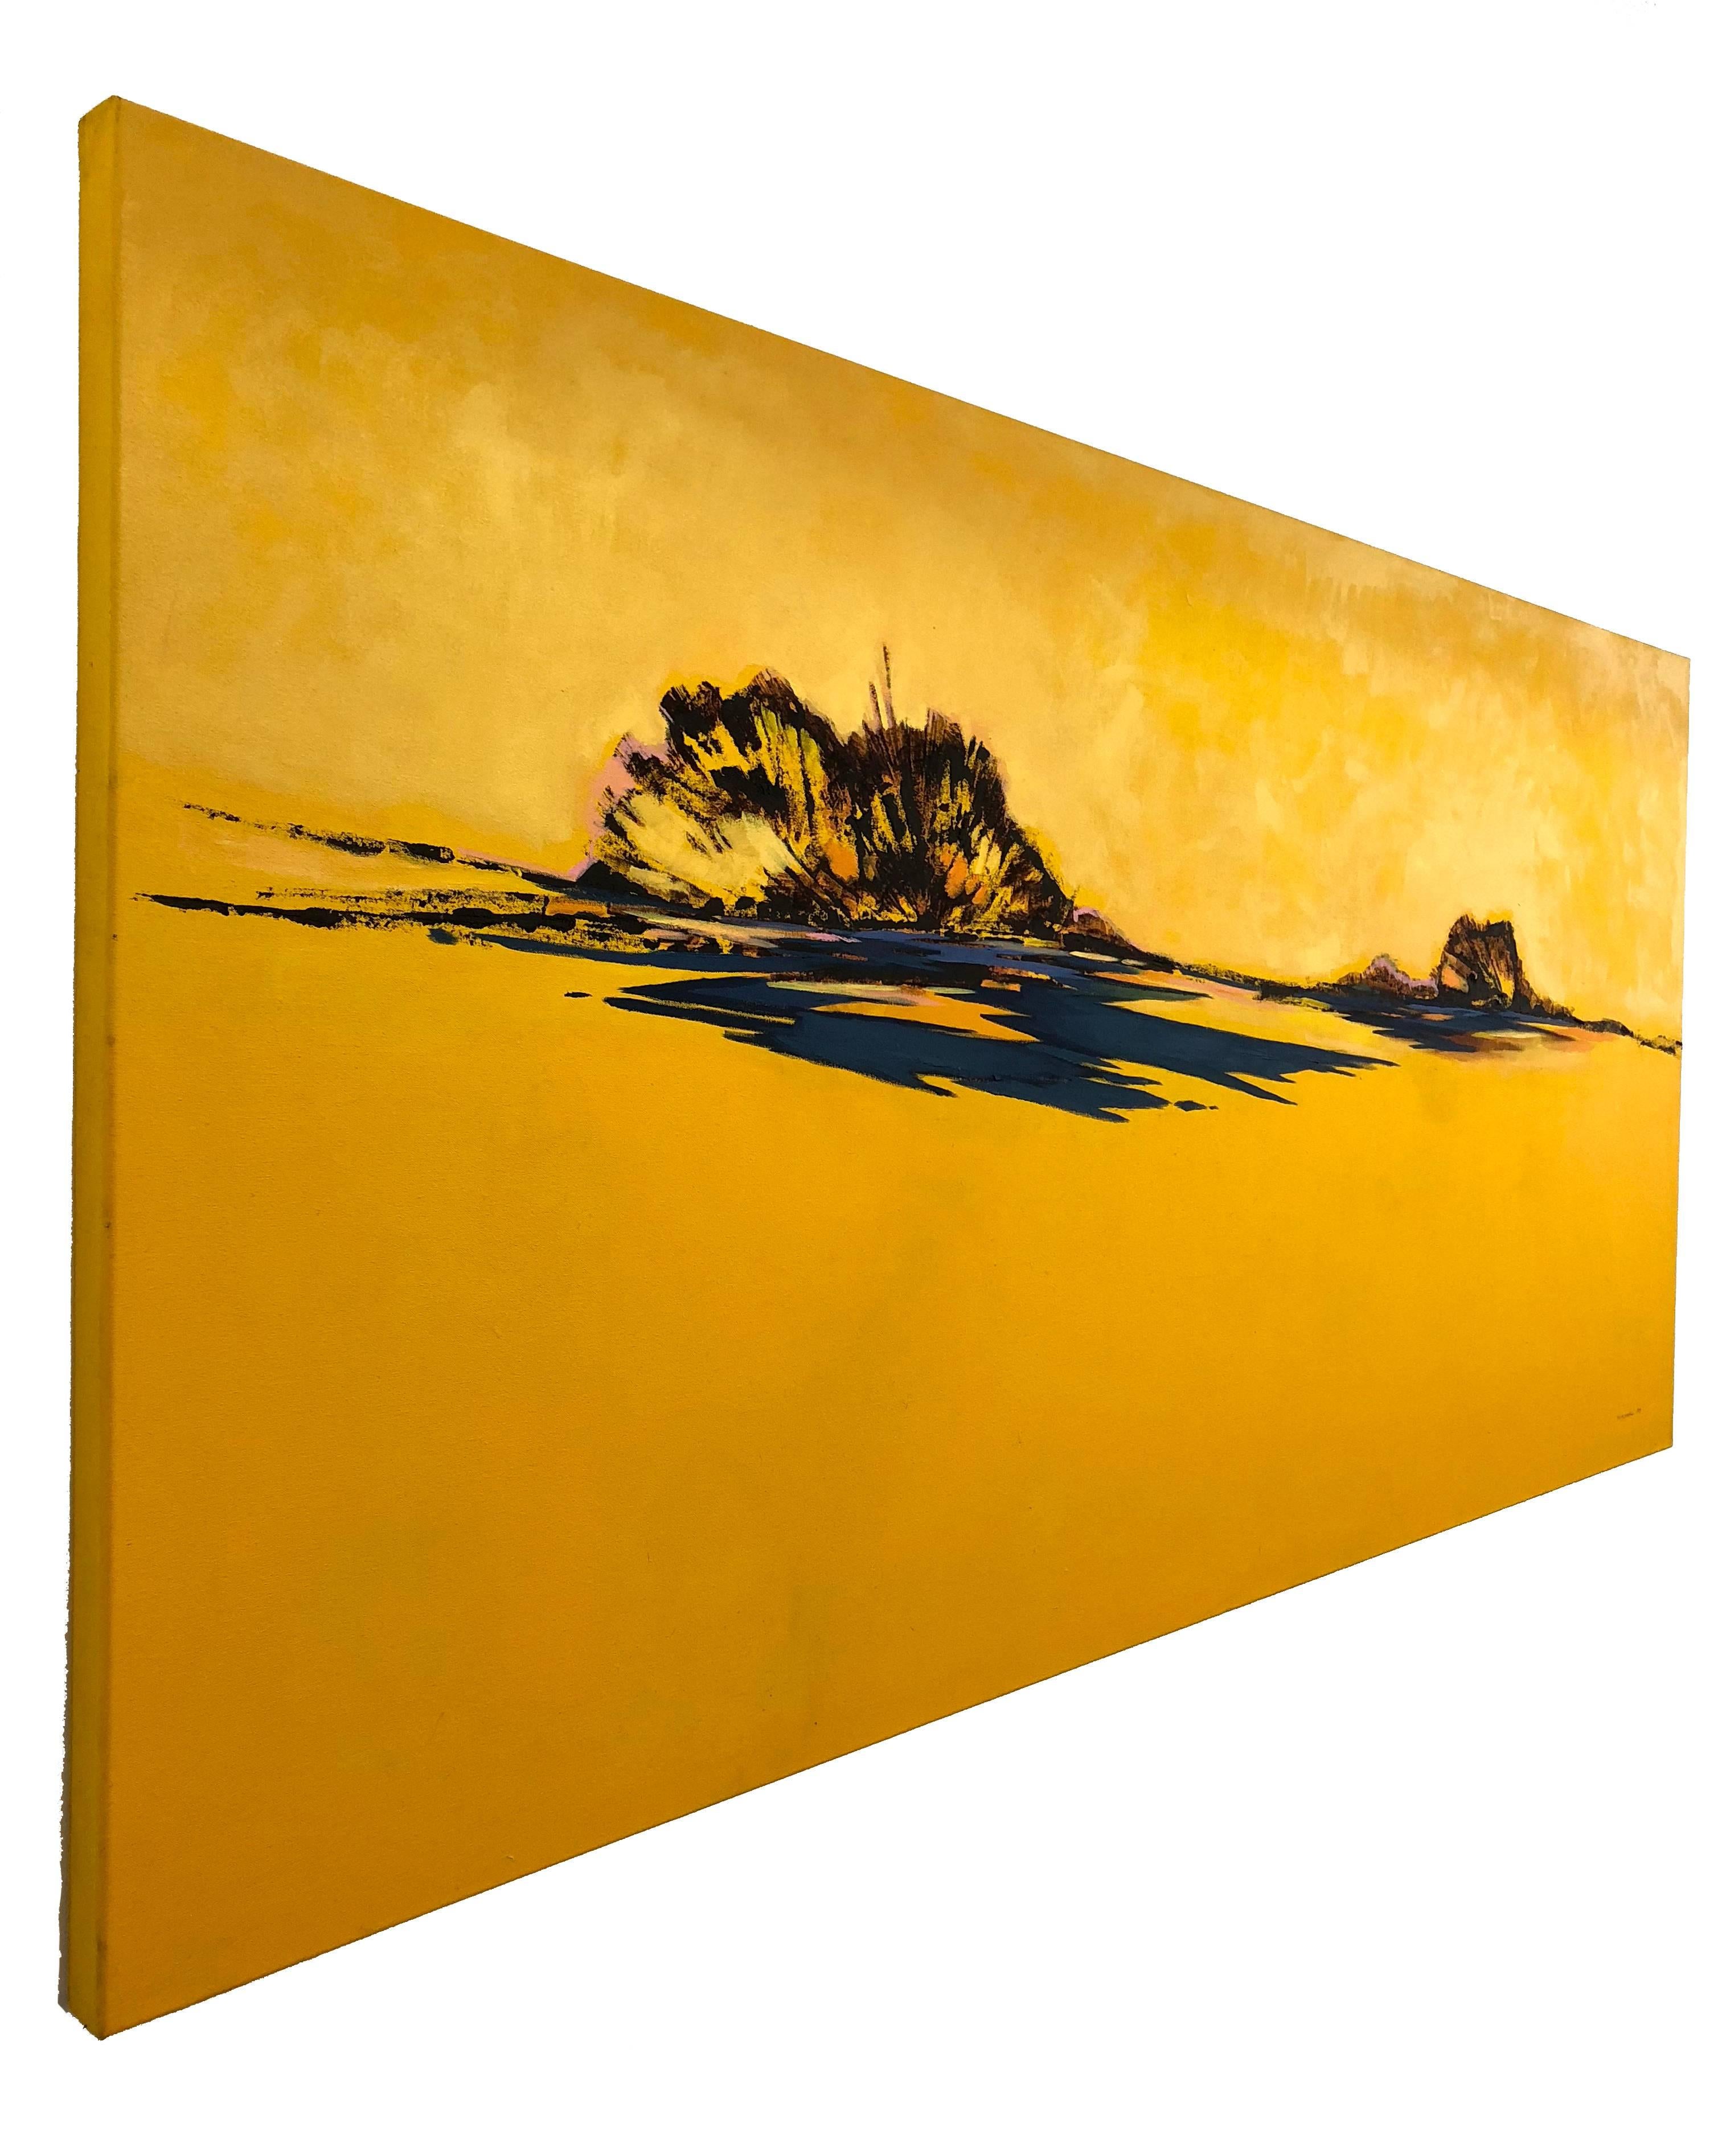 Sunshine Again, horizontal yellow abstract landscape painting, oil on canvas - Painting by Maria Jose Concha